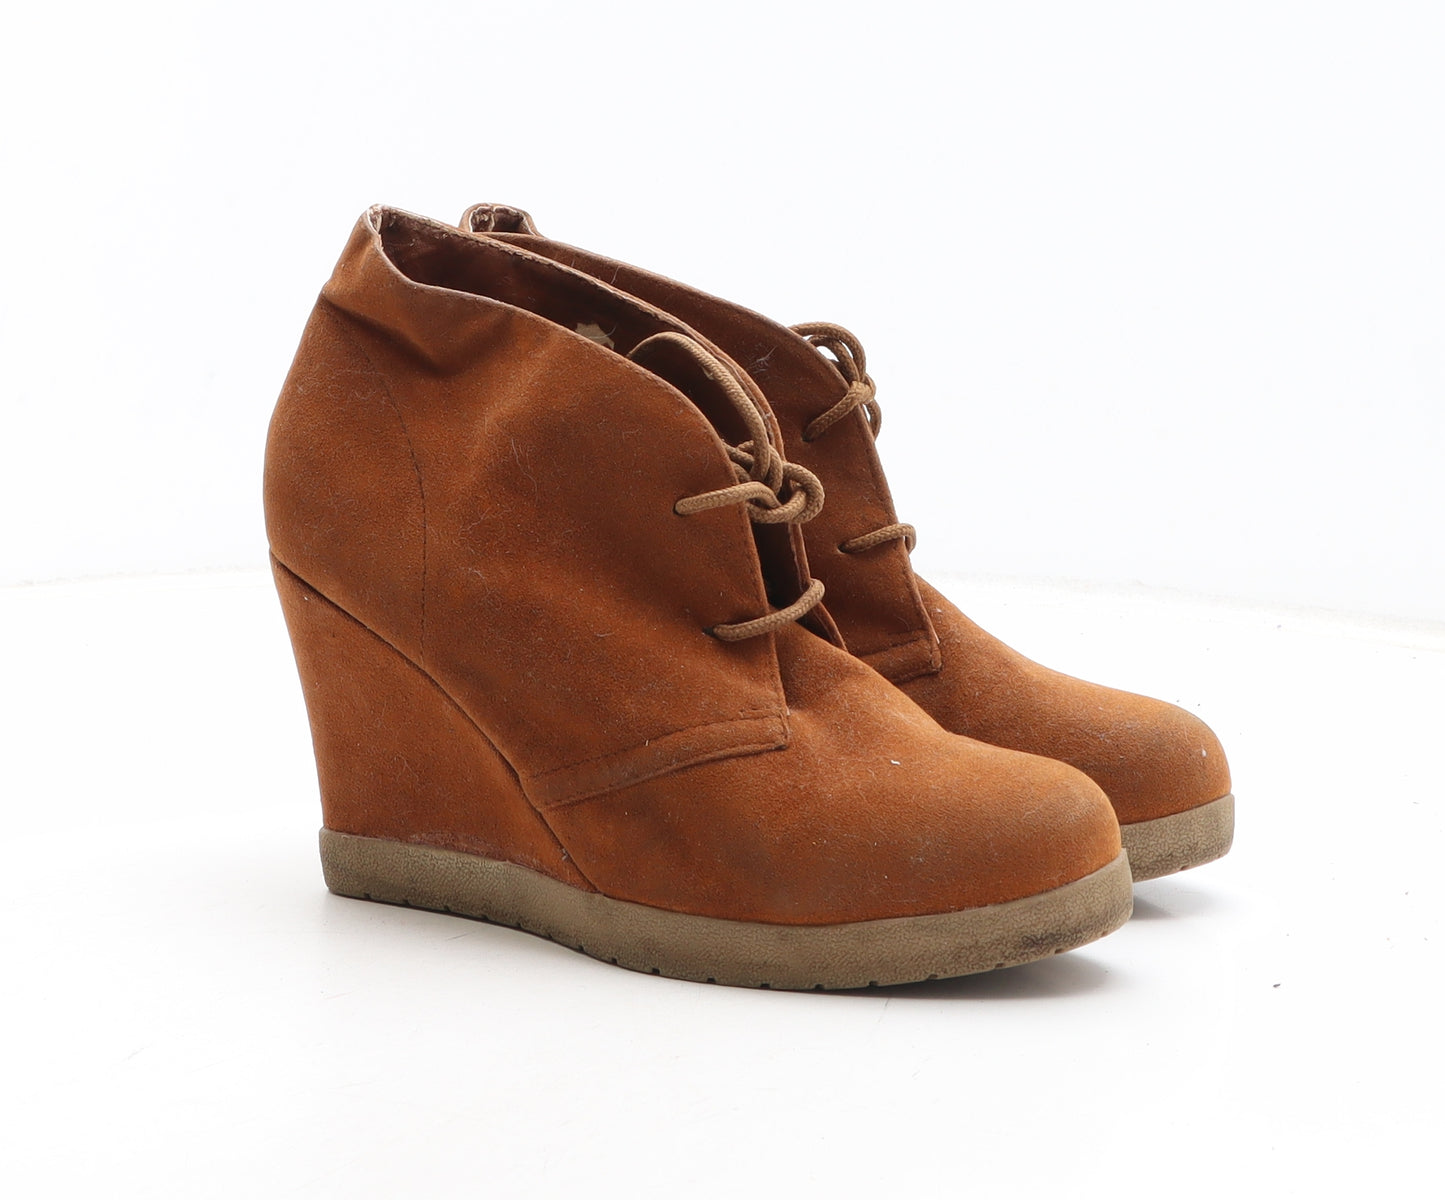 Atmosphere Womens Brown Synthetic Desert Boot UK